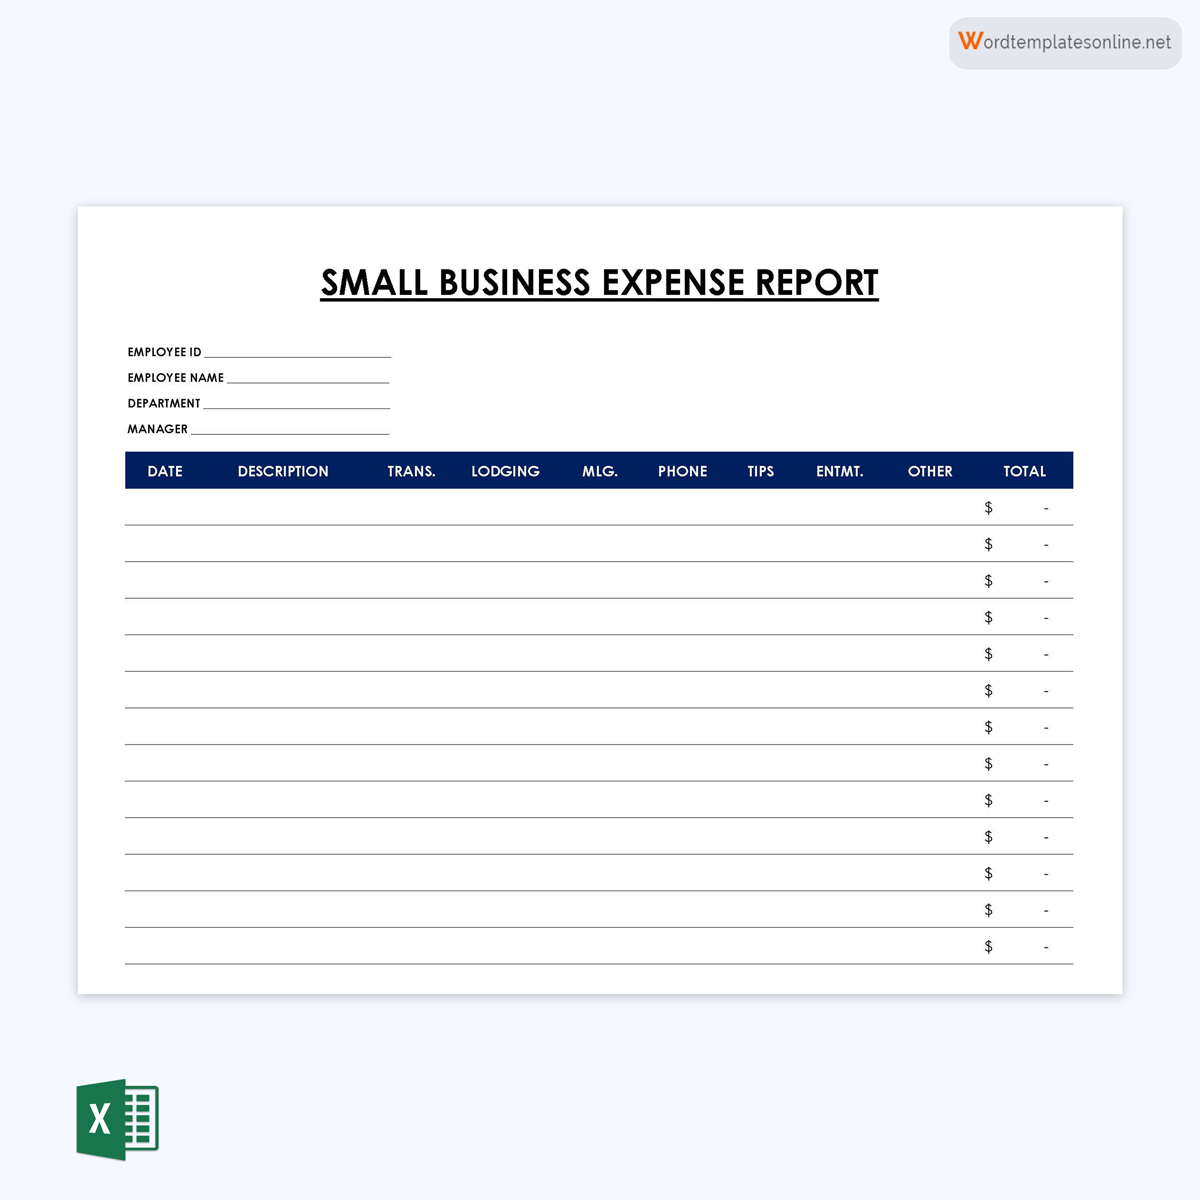 Free Printable Small Business Expense Report Template as Excel Format